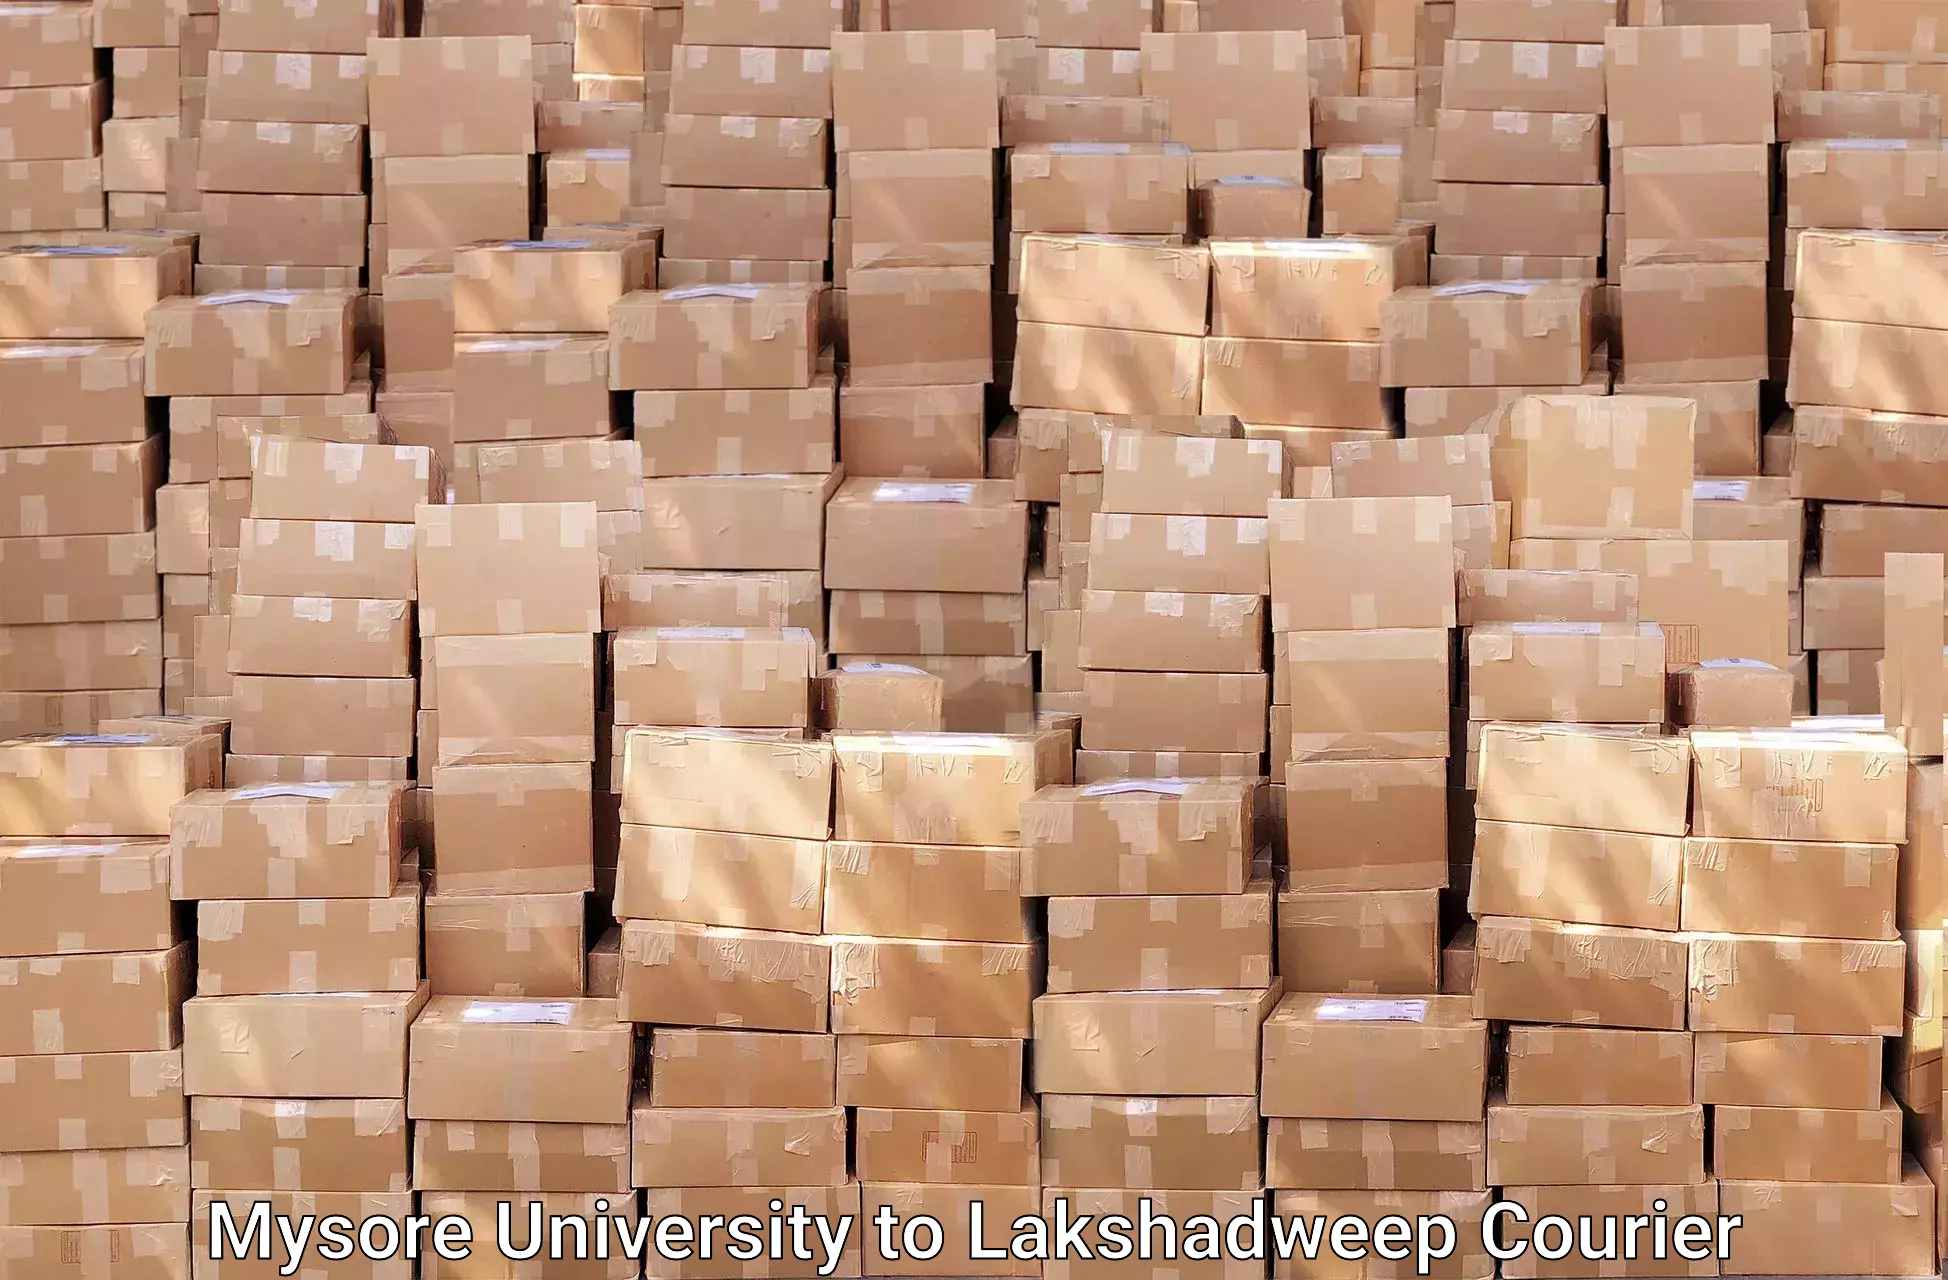 Home relocation services in Mysore University to Lakshadweep